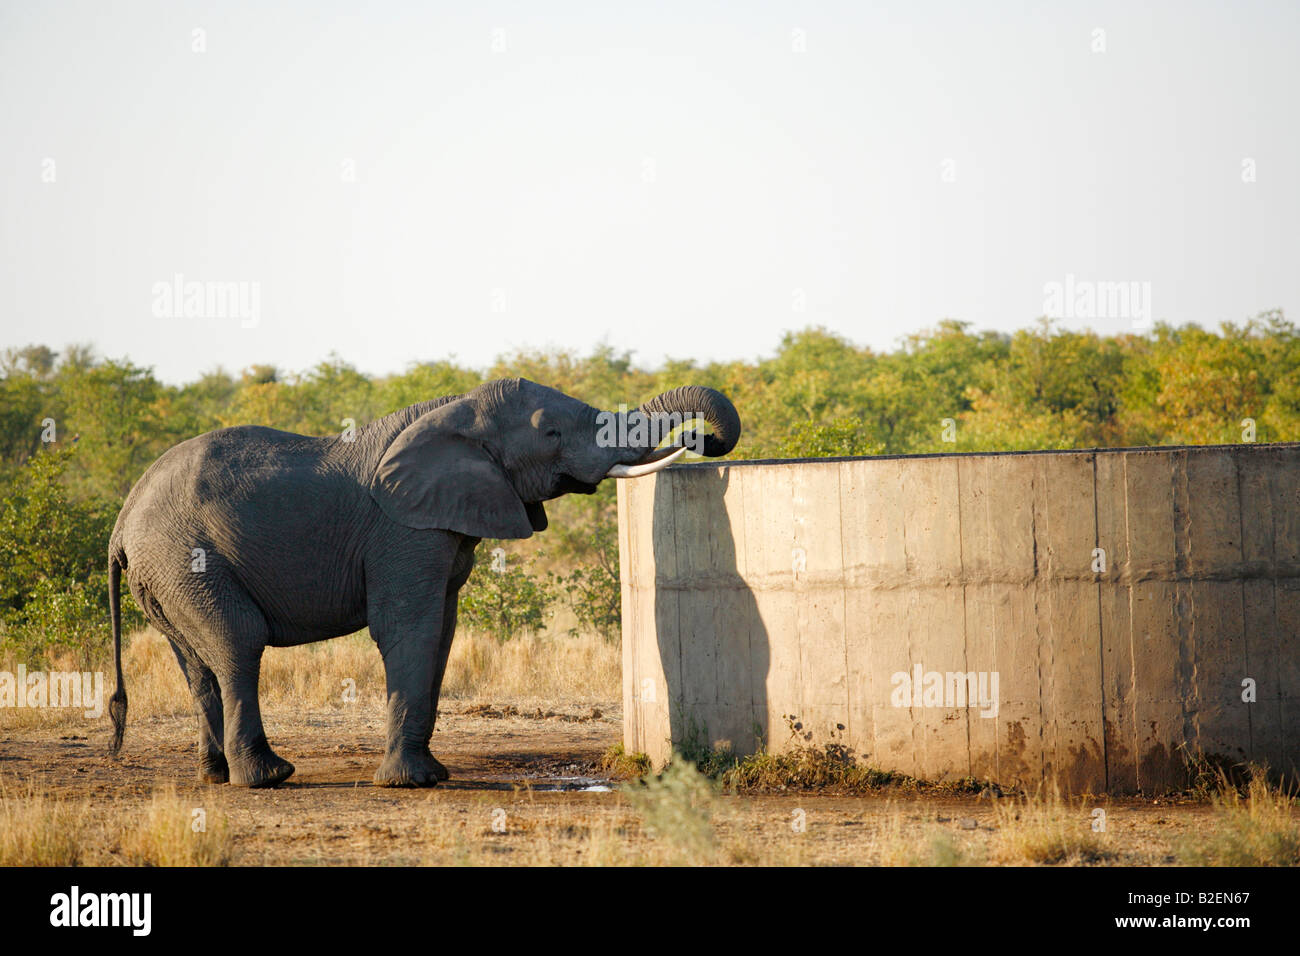 An African elephant reaching over into a reservoir to drink water Stock Photo